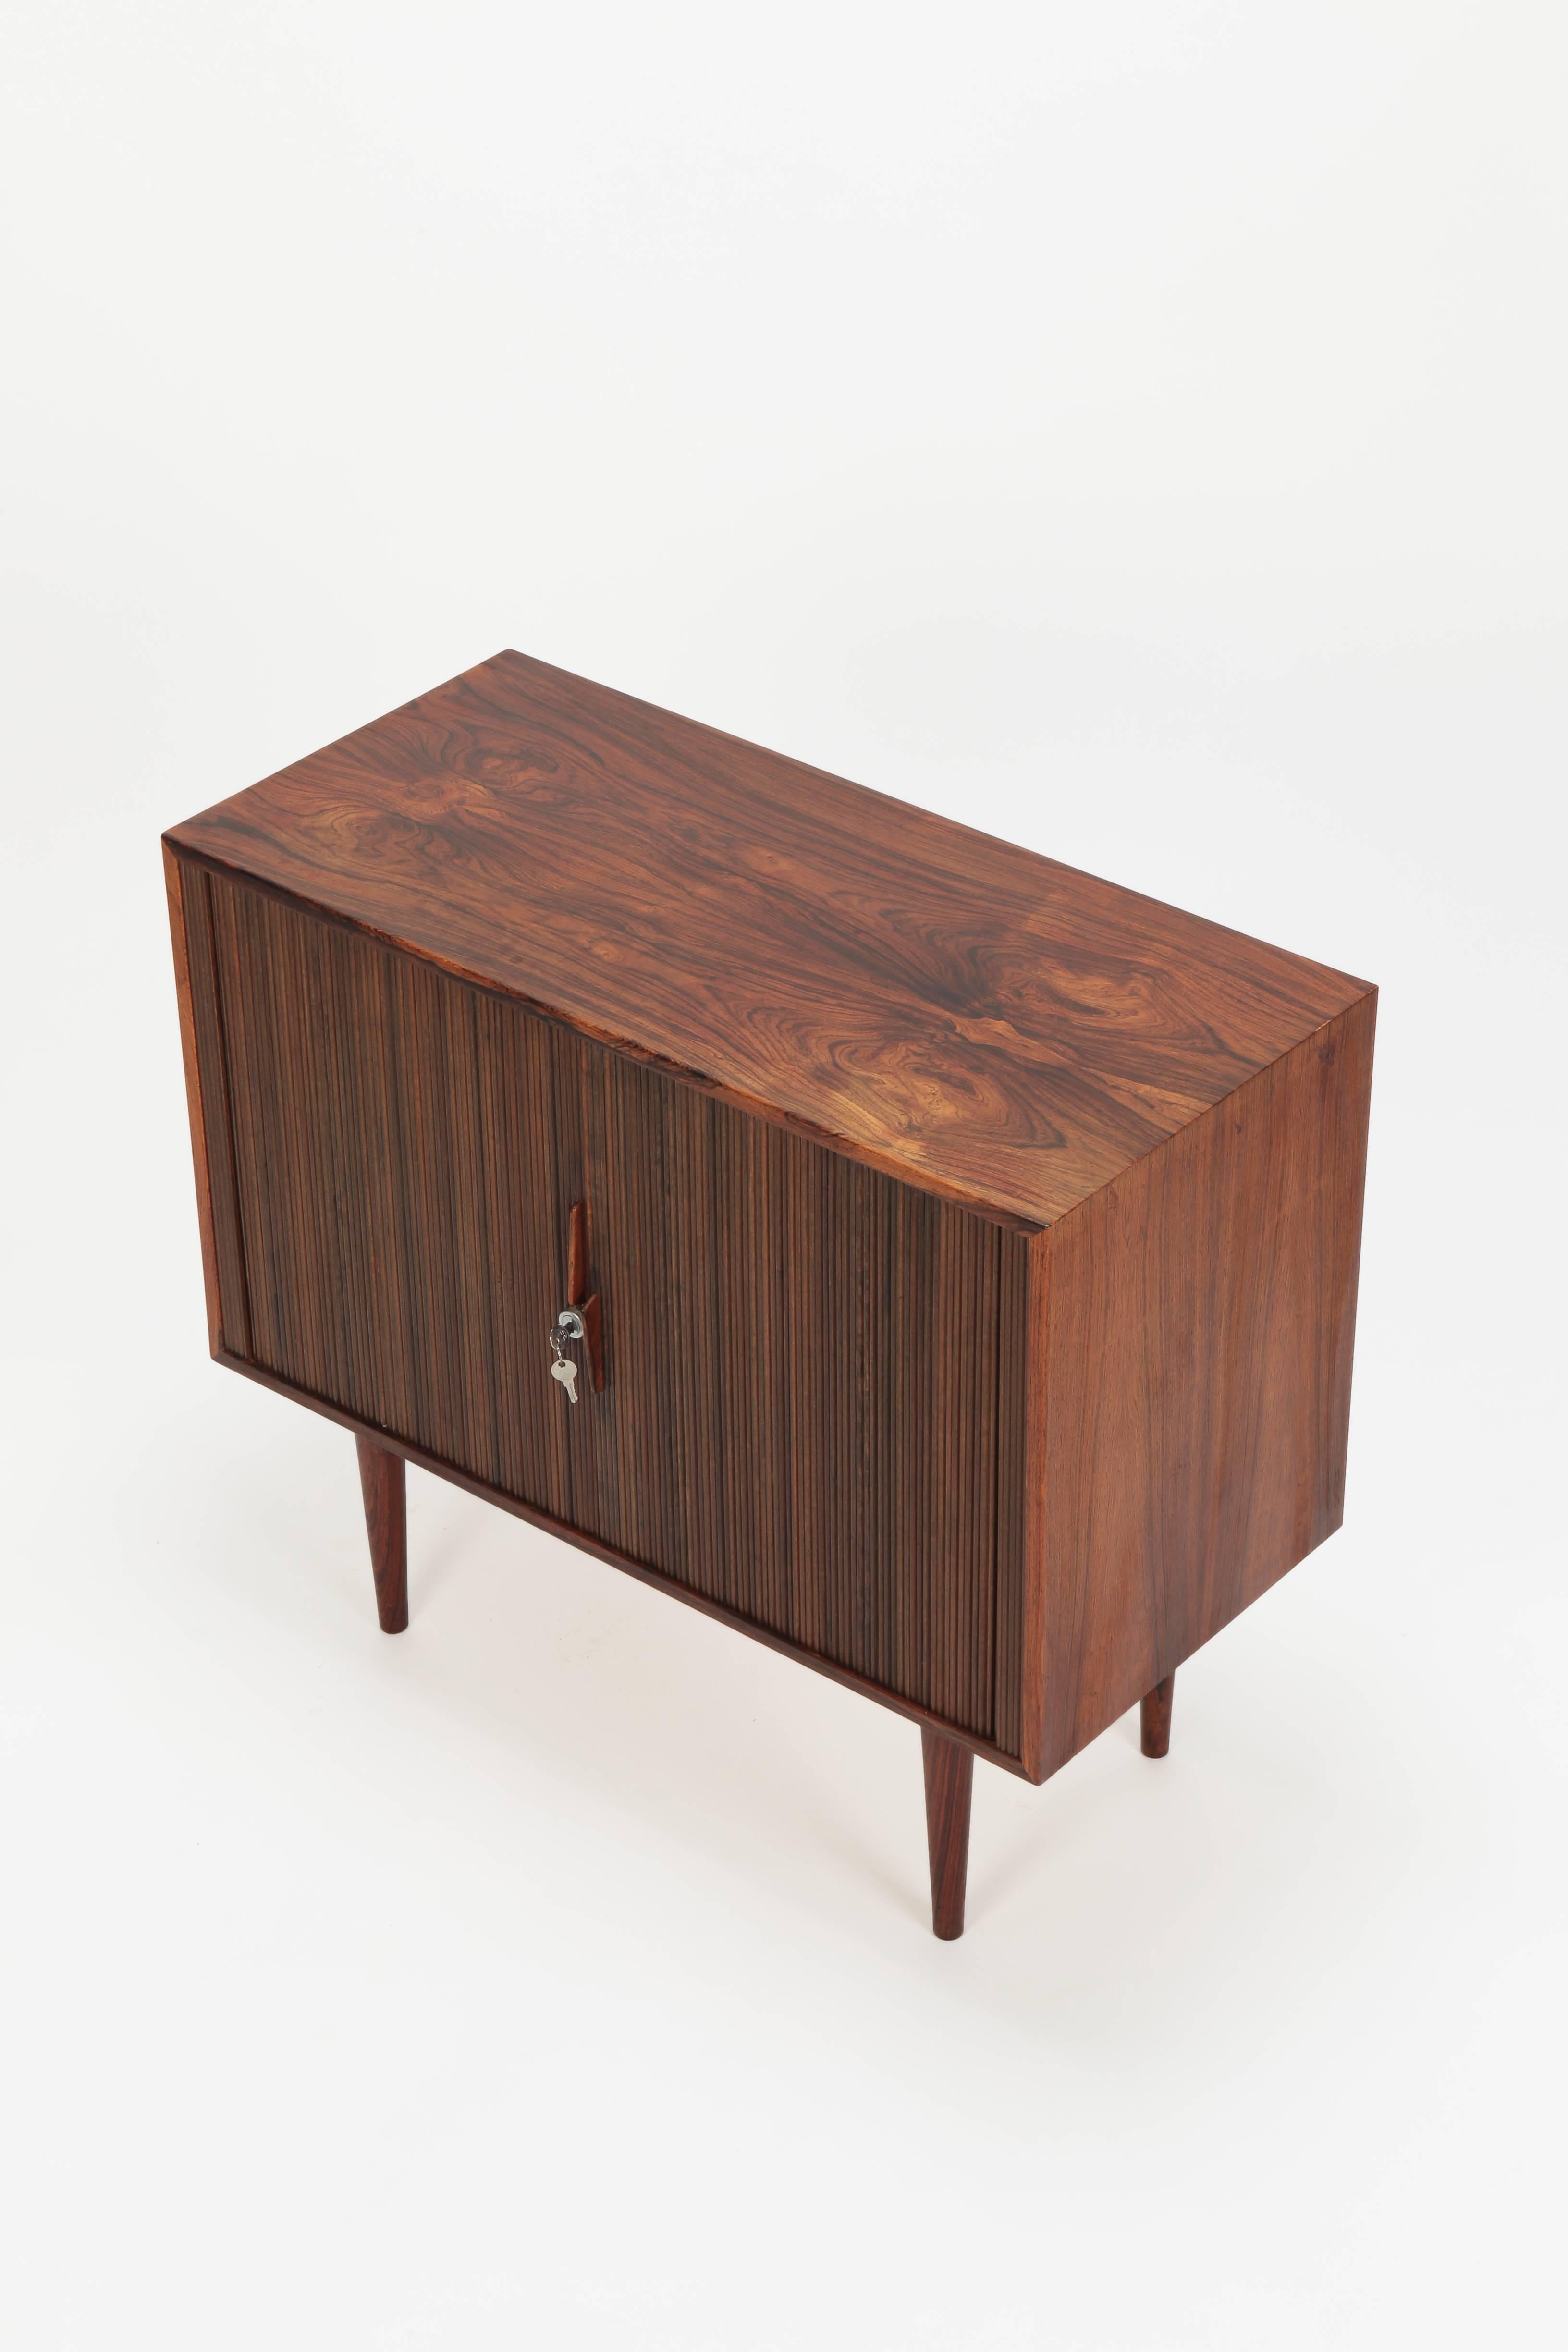 Kai Kristiansen sideboard manufactured by FM Moebler in the 1960s. Small rosewood sideboard with lockable tambour doors, one shelf and two drawers.